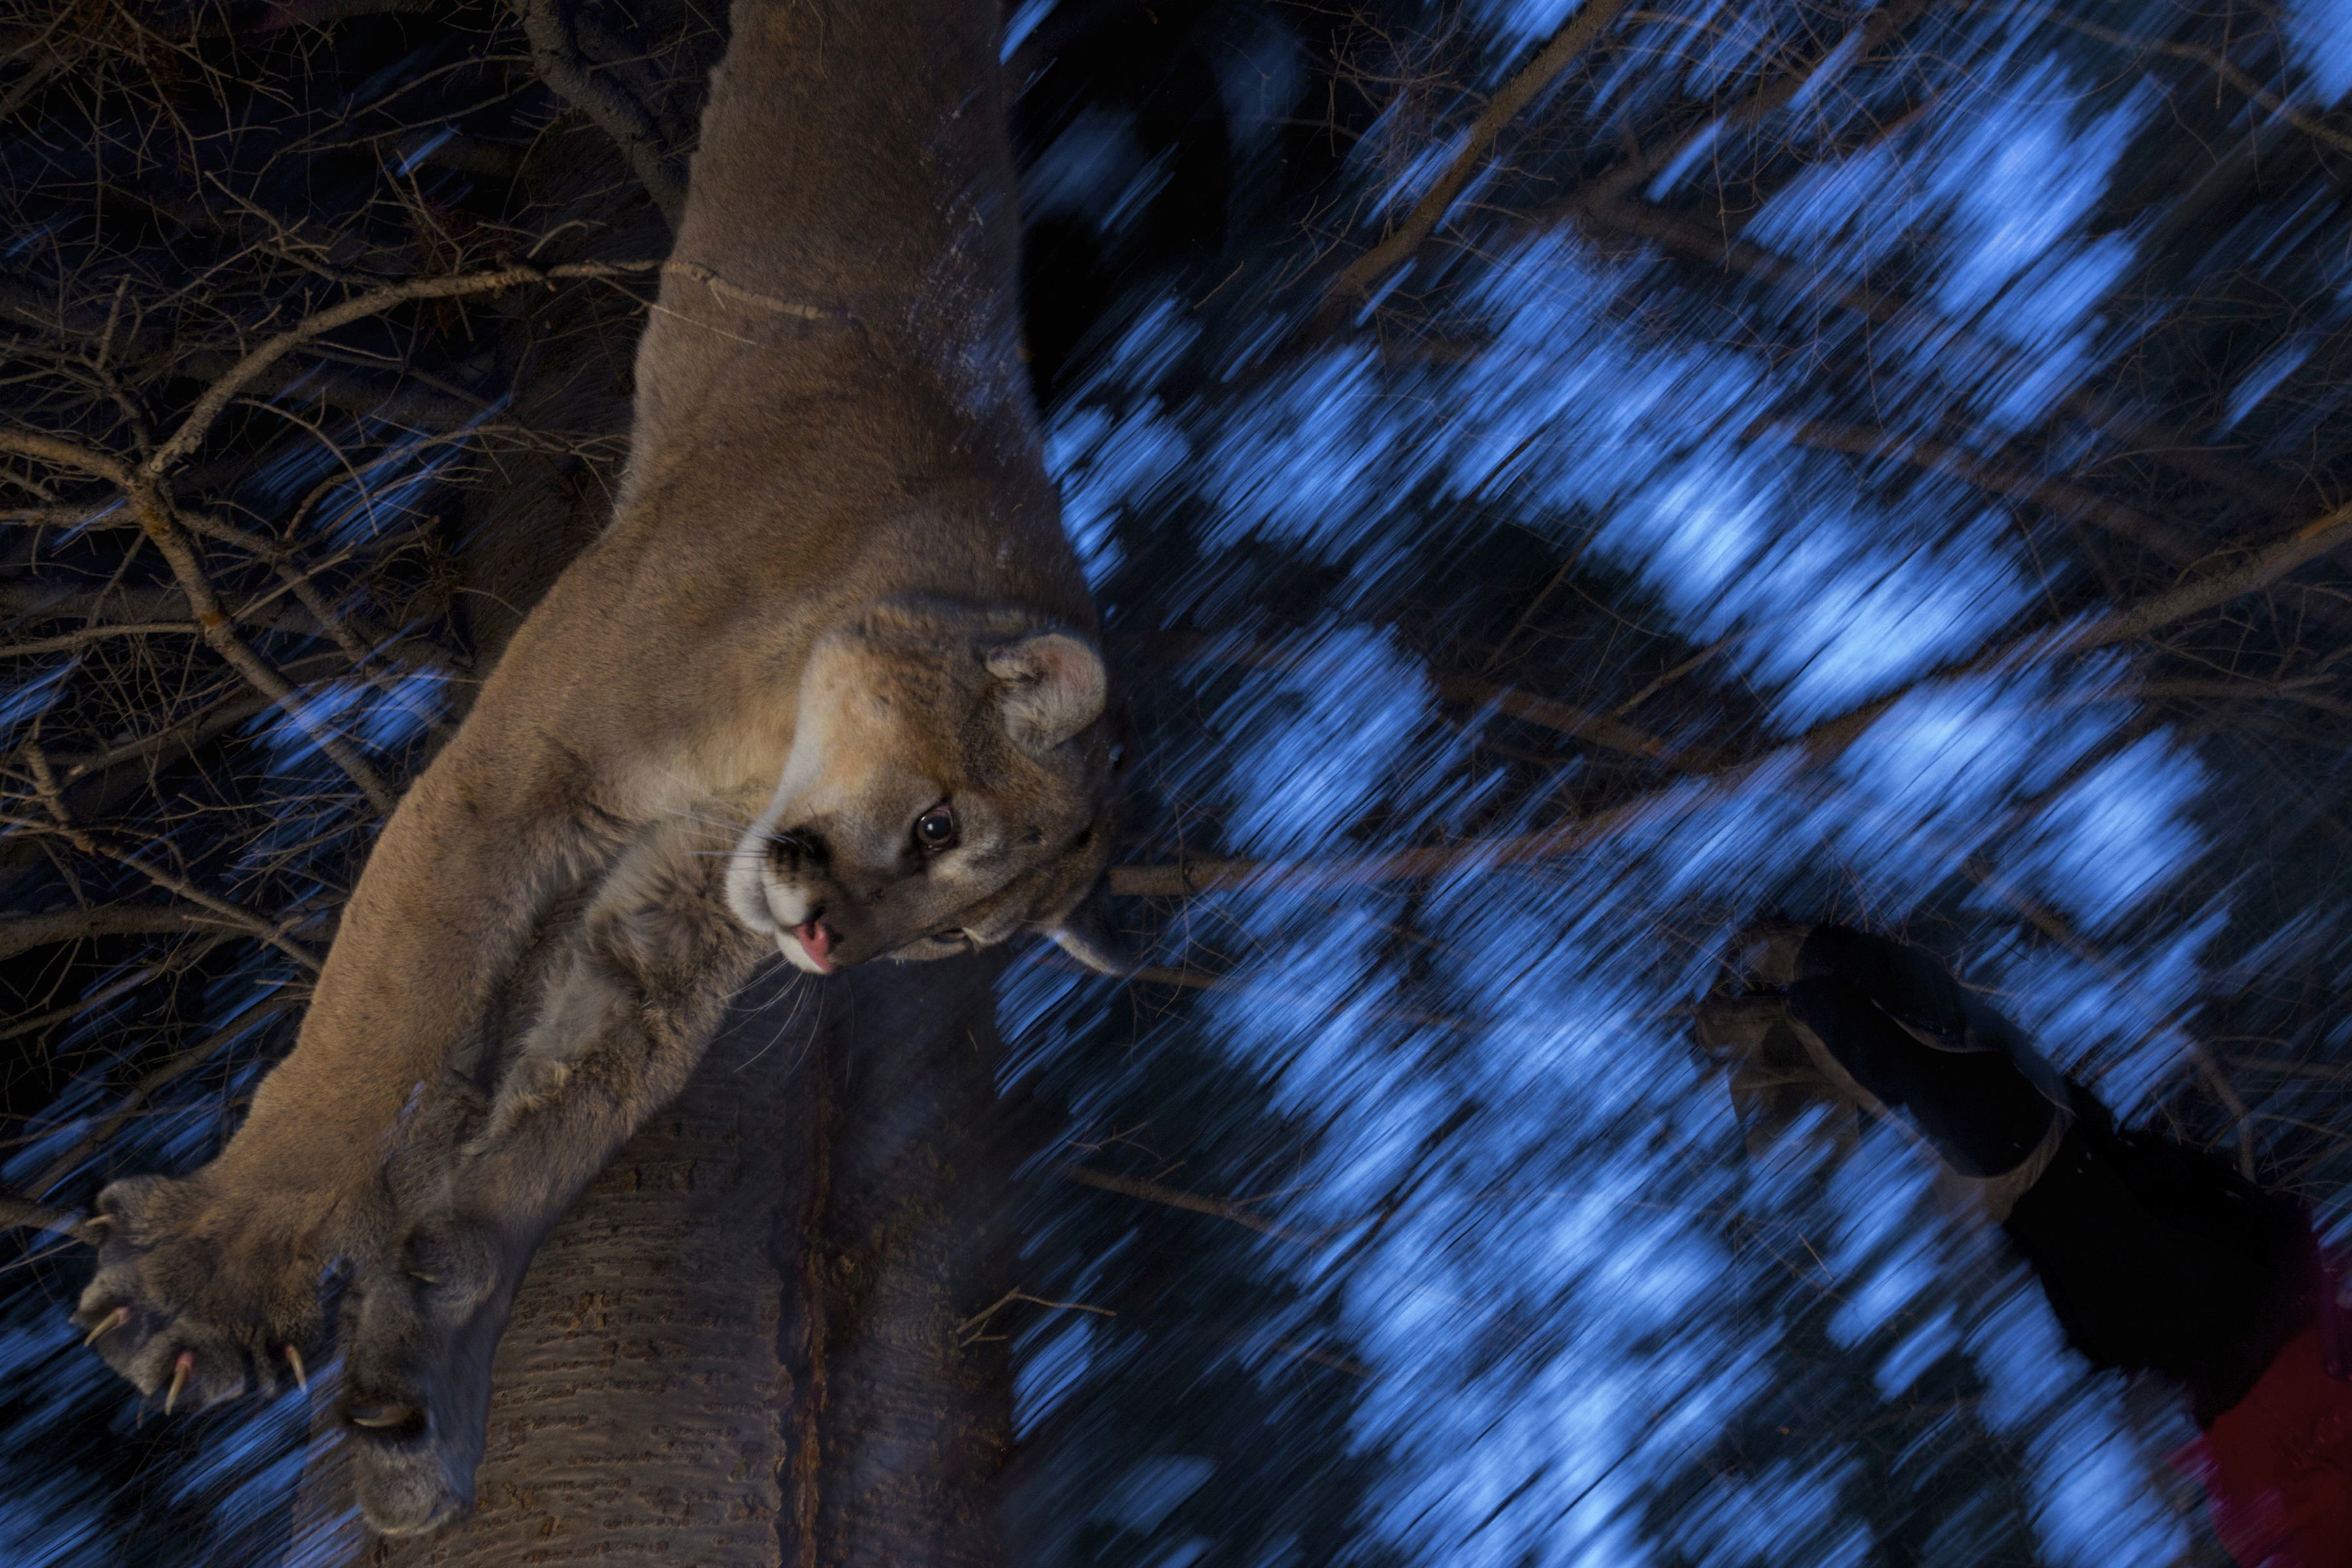 Darted cougar lowered from a tree.